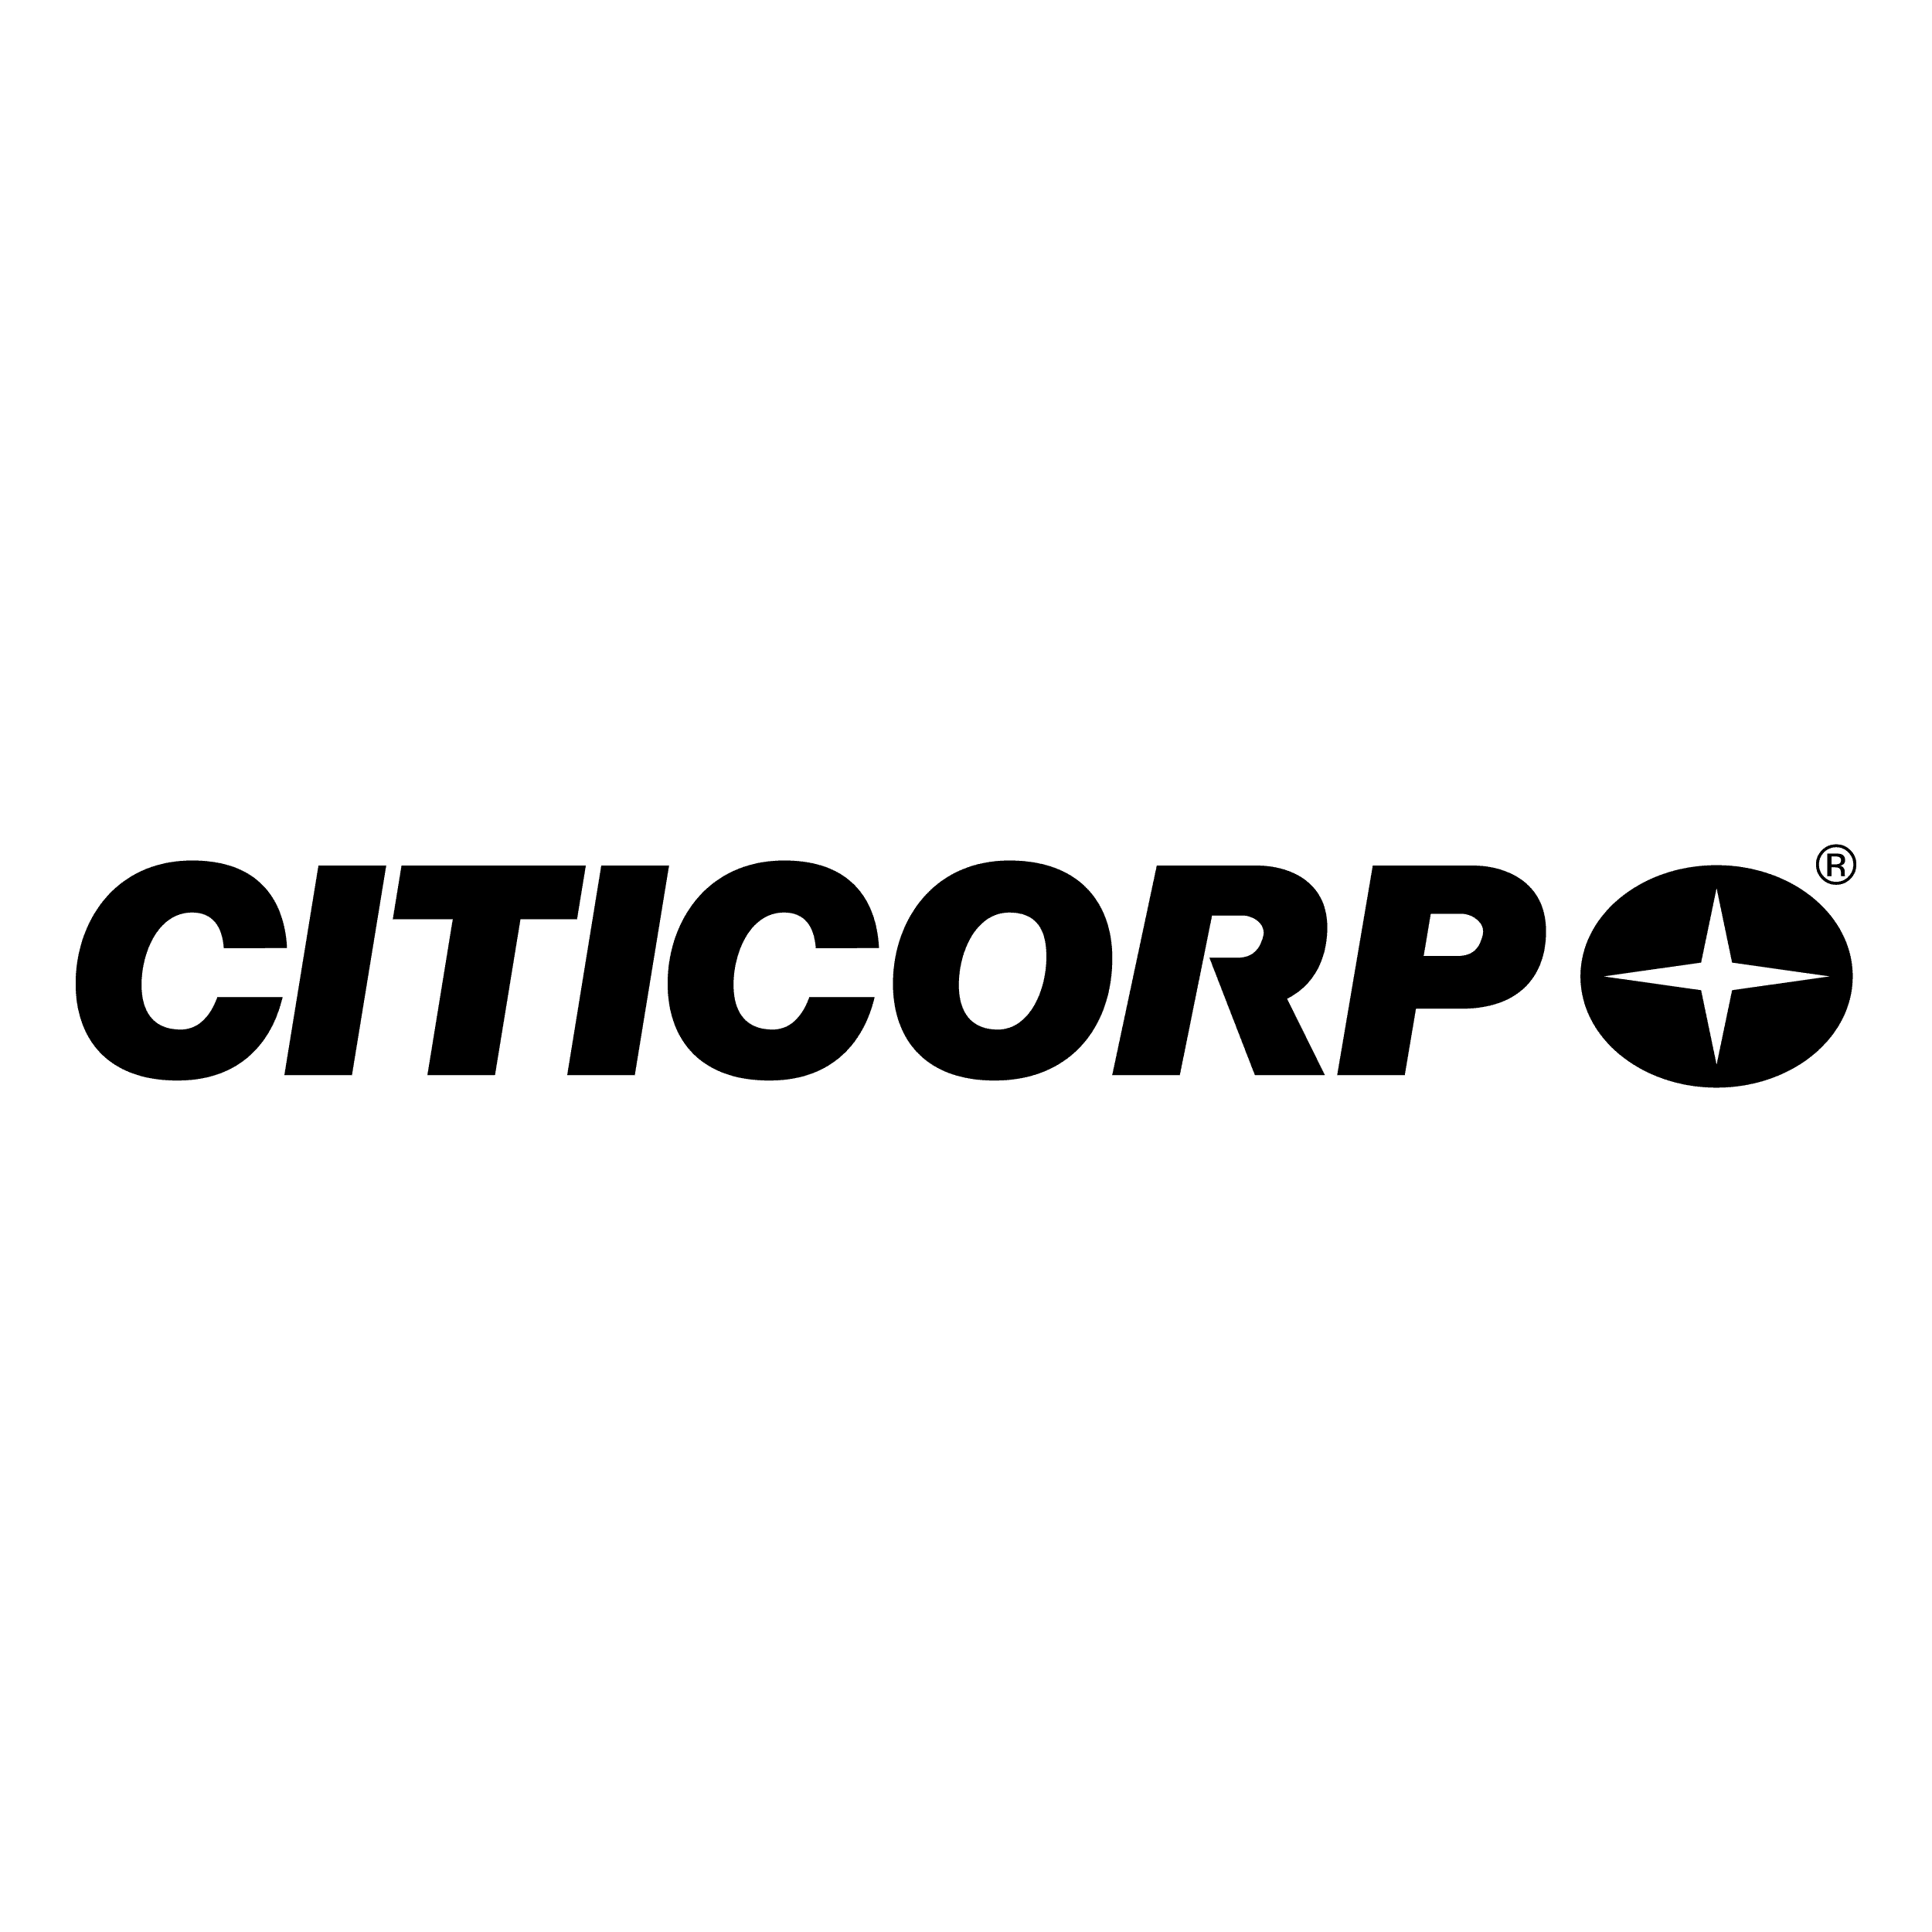 RAAM | Realty Advisors and Asset Managers, Inc. - Clients: Citicorp